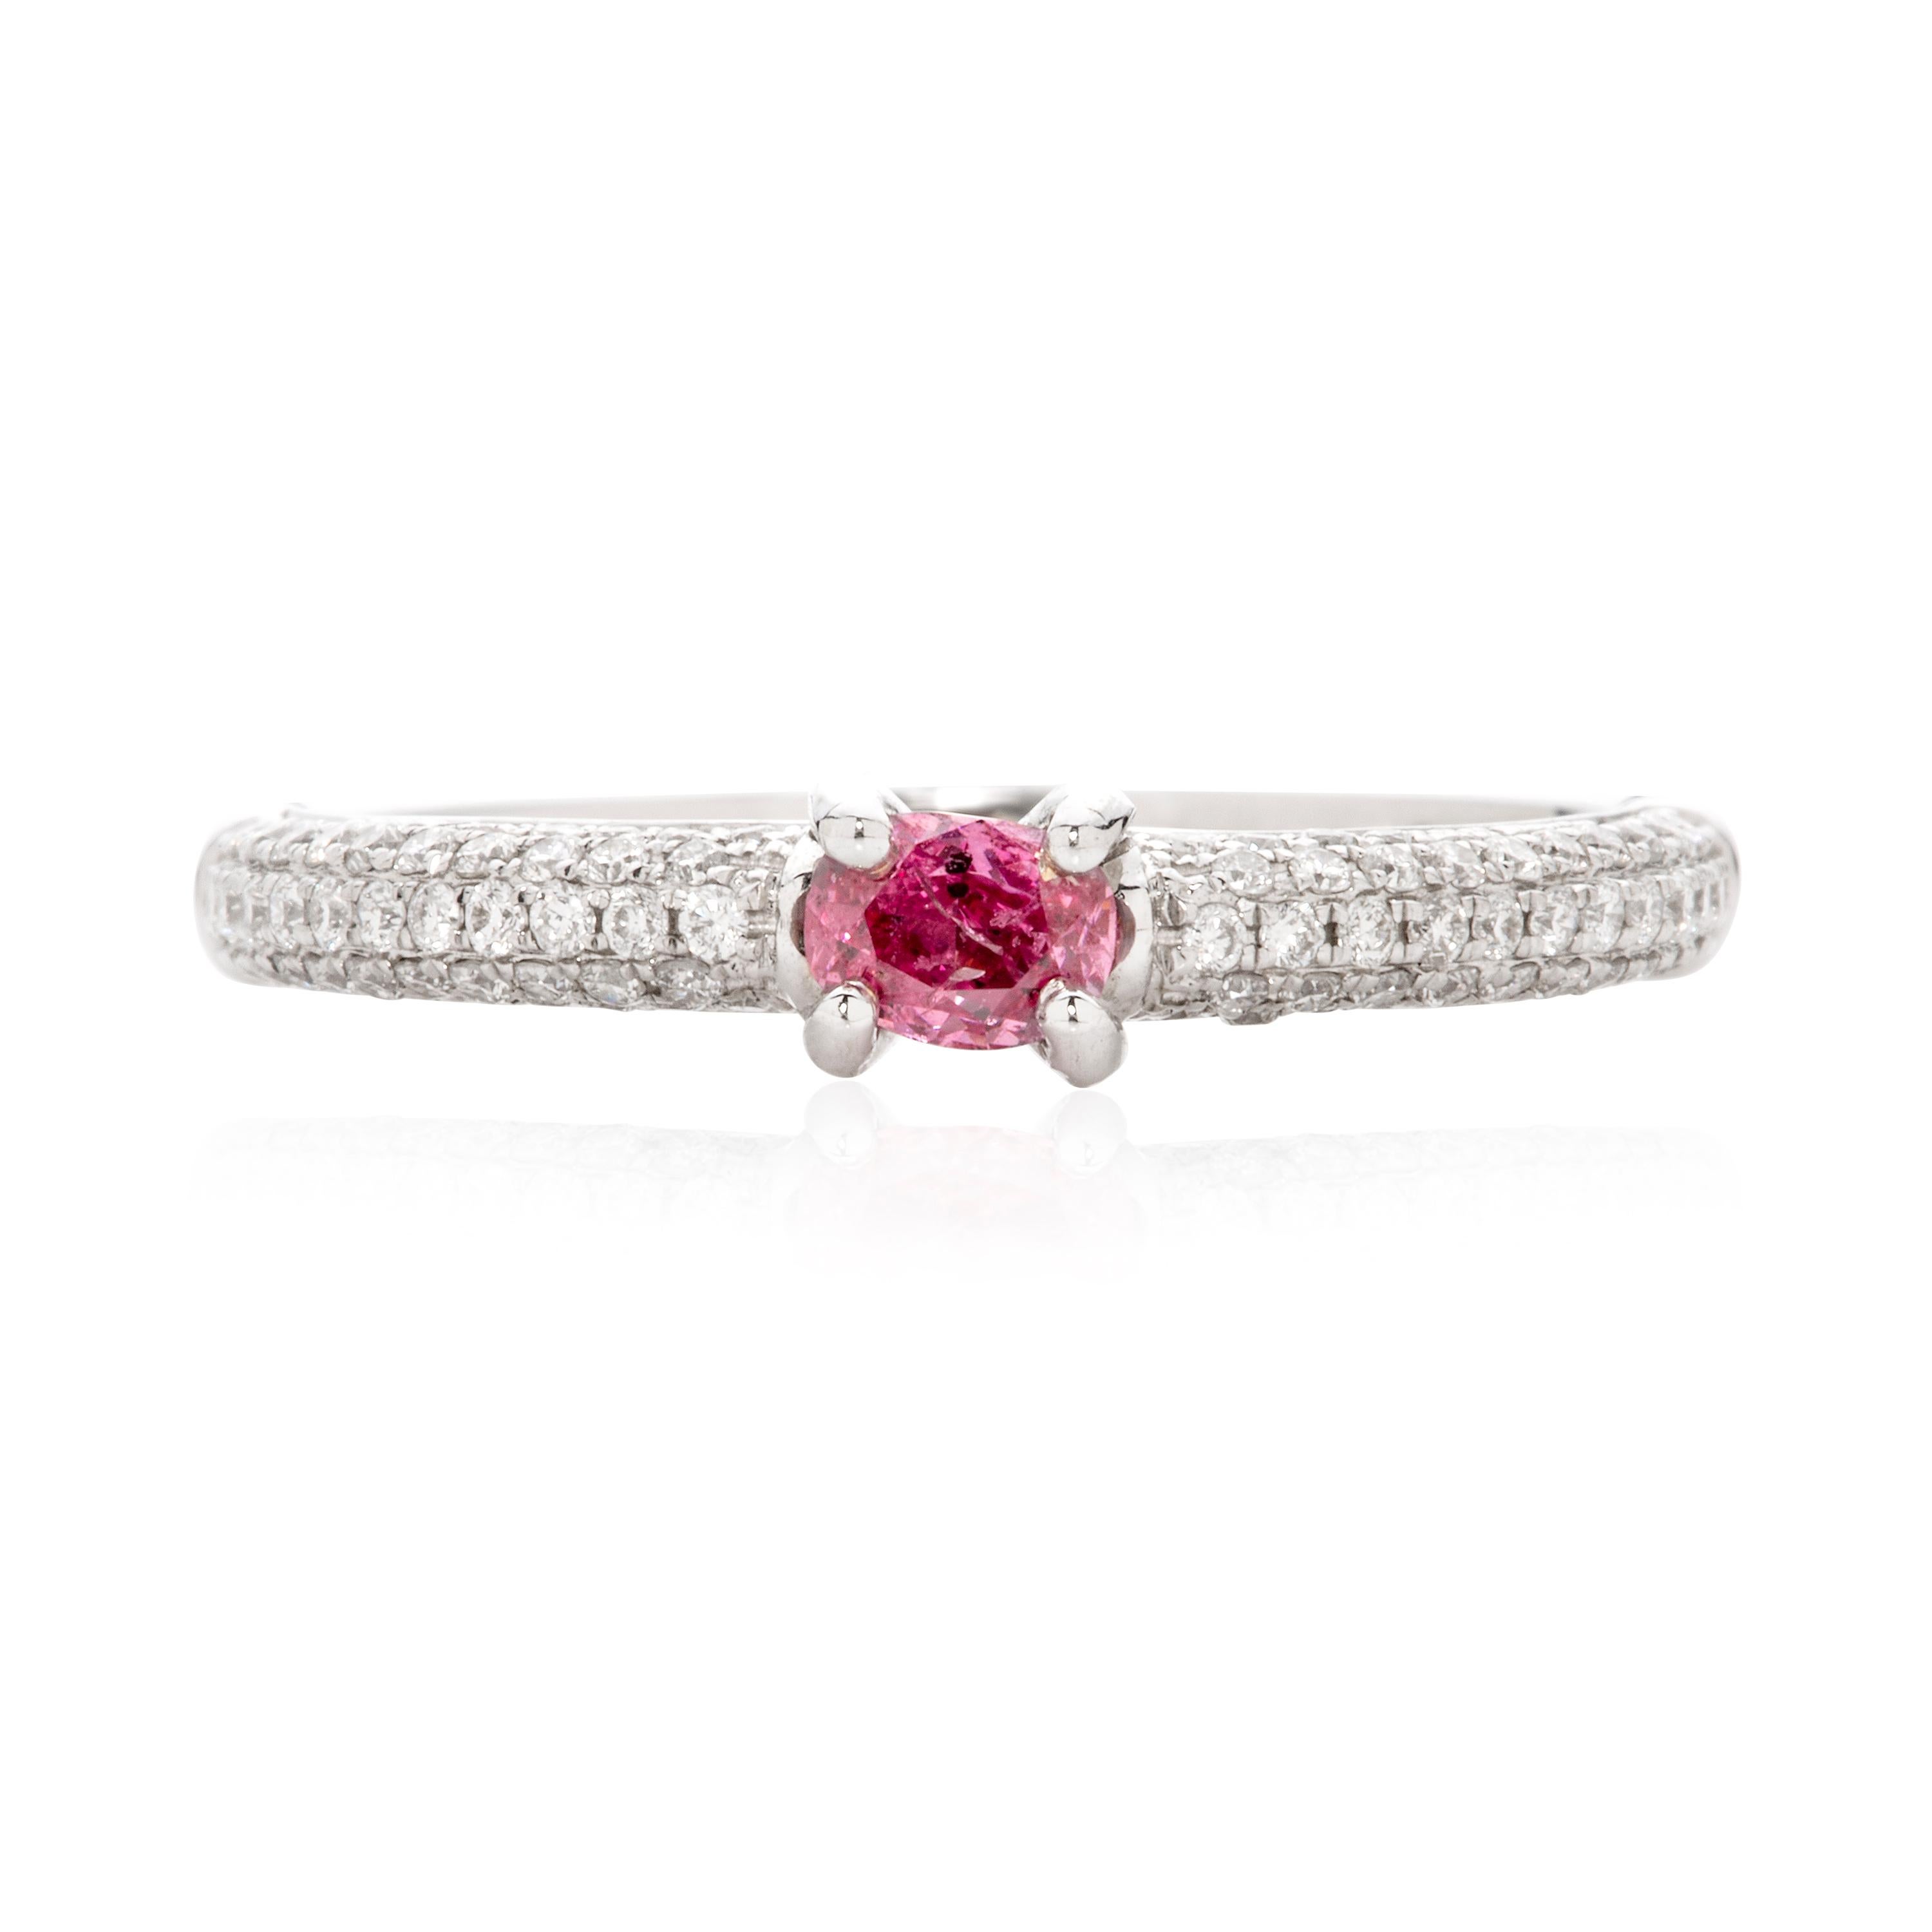 An 18 karat white gold ring featuring a GIA certified 0.18 carat fancy vivid purplish pink diamond (clarity: I2). The shoulders of the ring are set with 78 round brilliant cut white diamonds (clarity: VS-SI) totalling 0.29 carats. The ring size is N